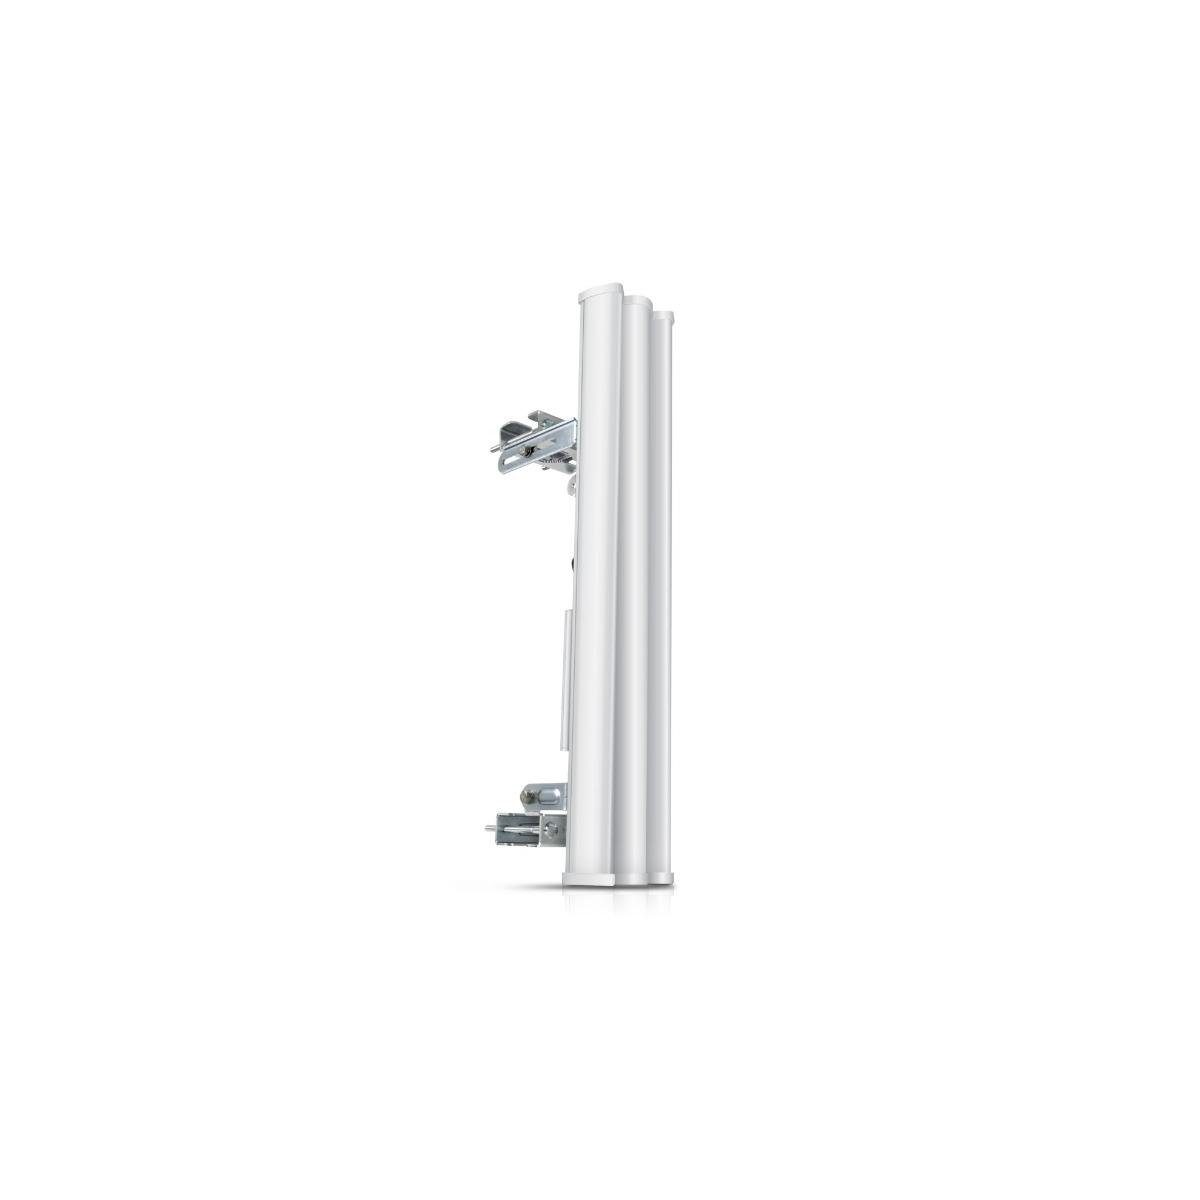 Ubiquiti GHz WLAN-Antenne AM-5G19-120 2x2 5 Sector Networks - MIMO Antenne, AirMax